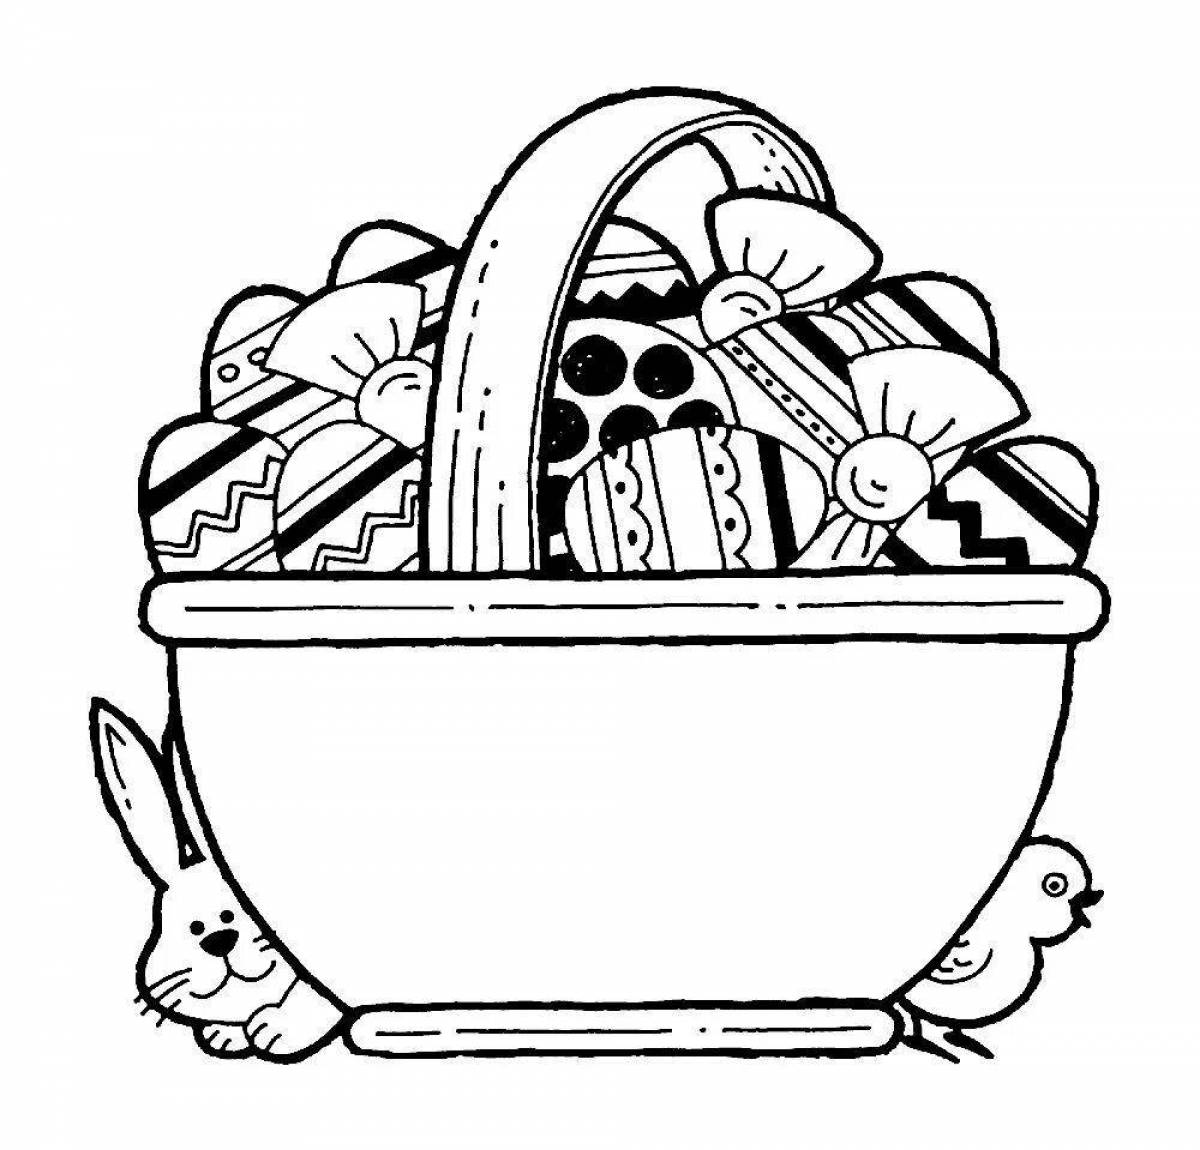 Coloring page rich basket of food